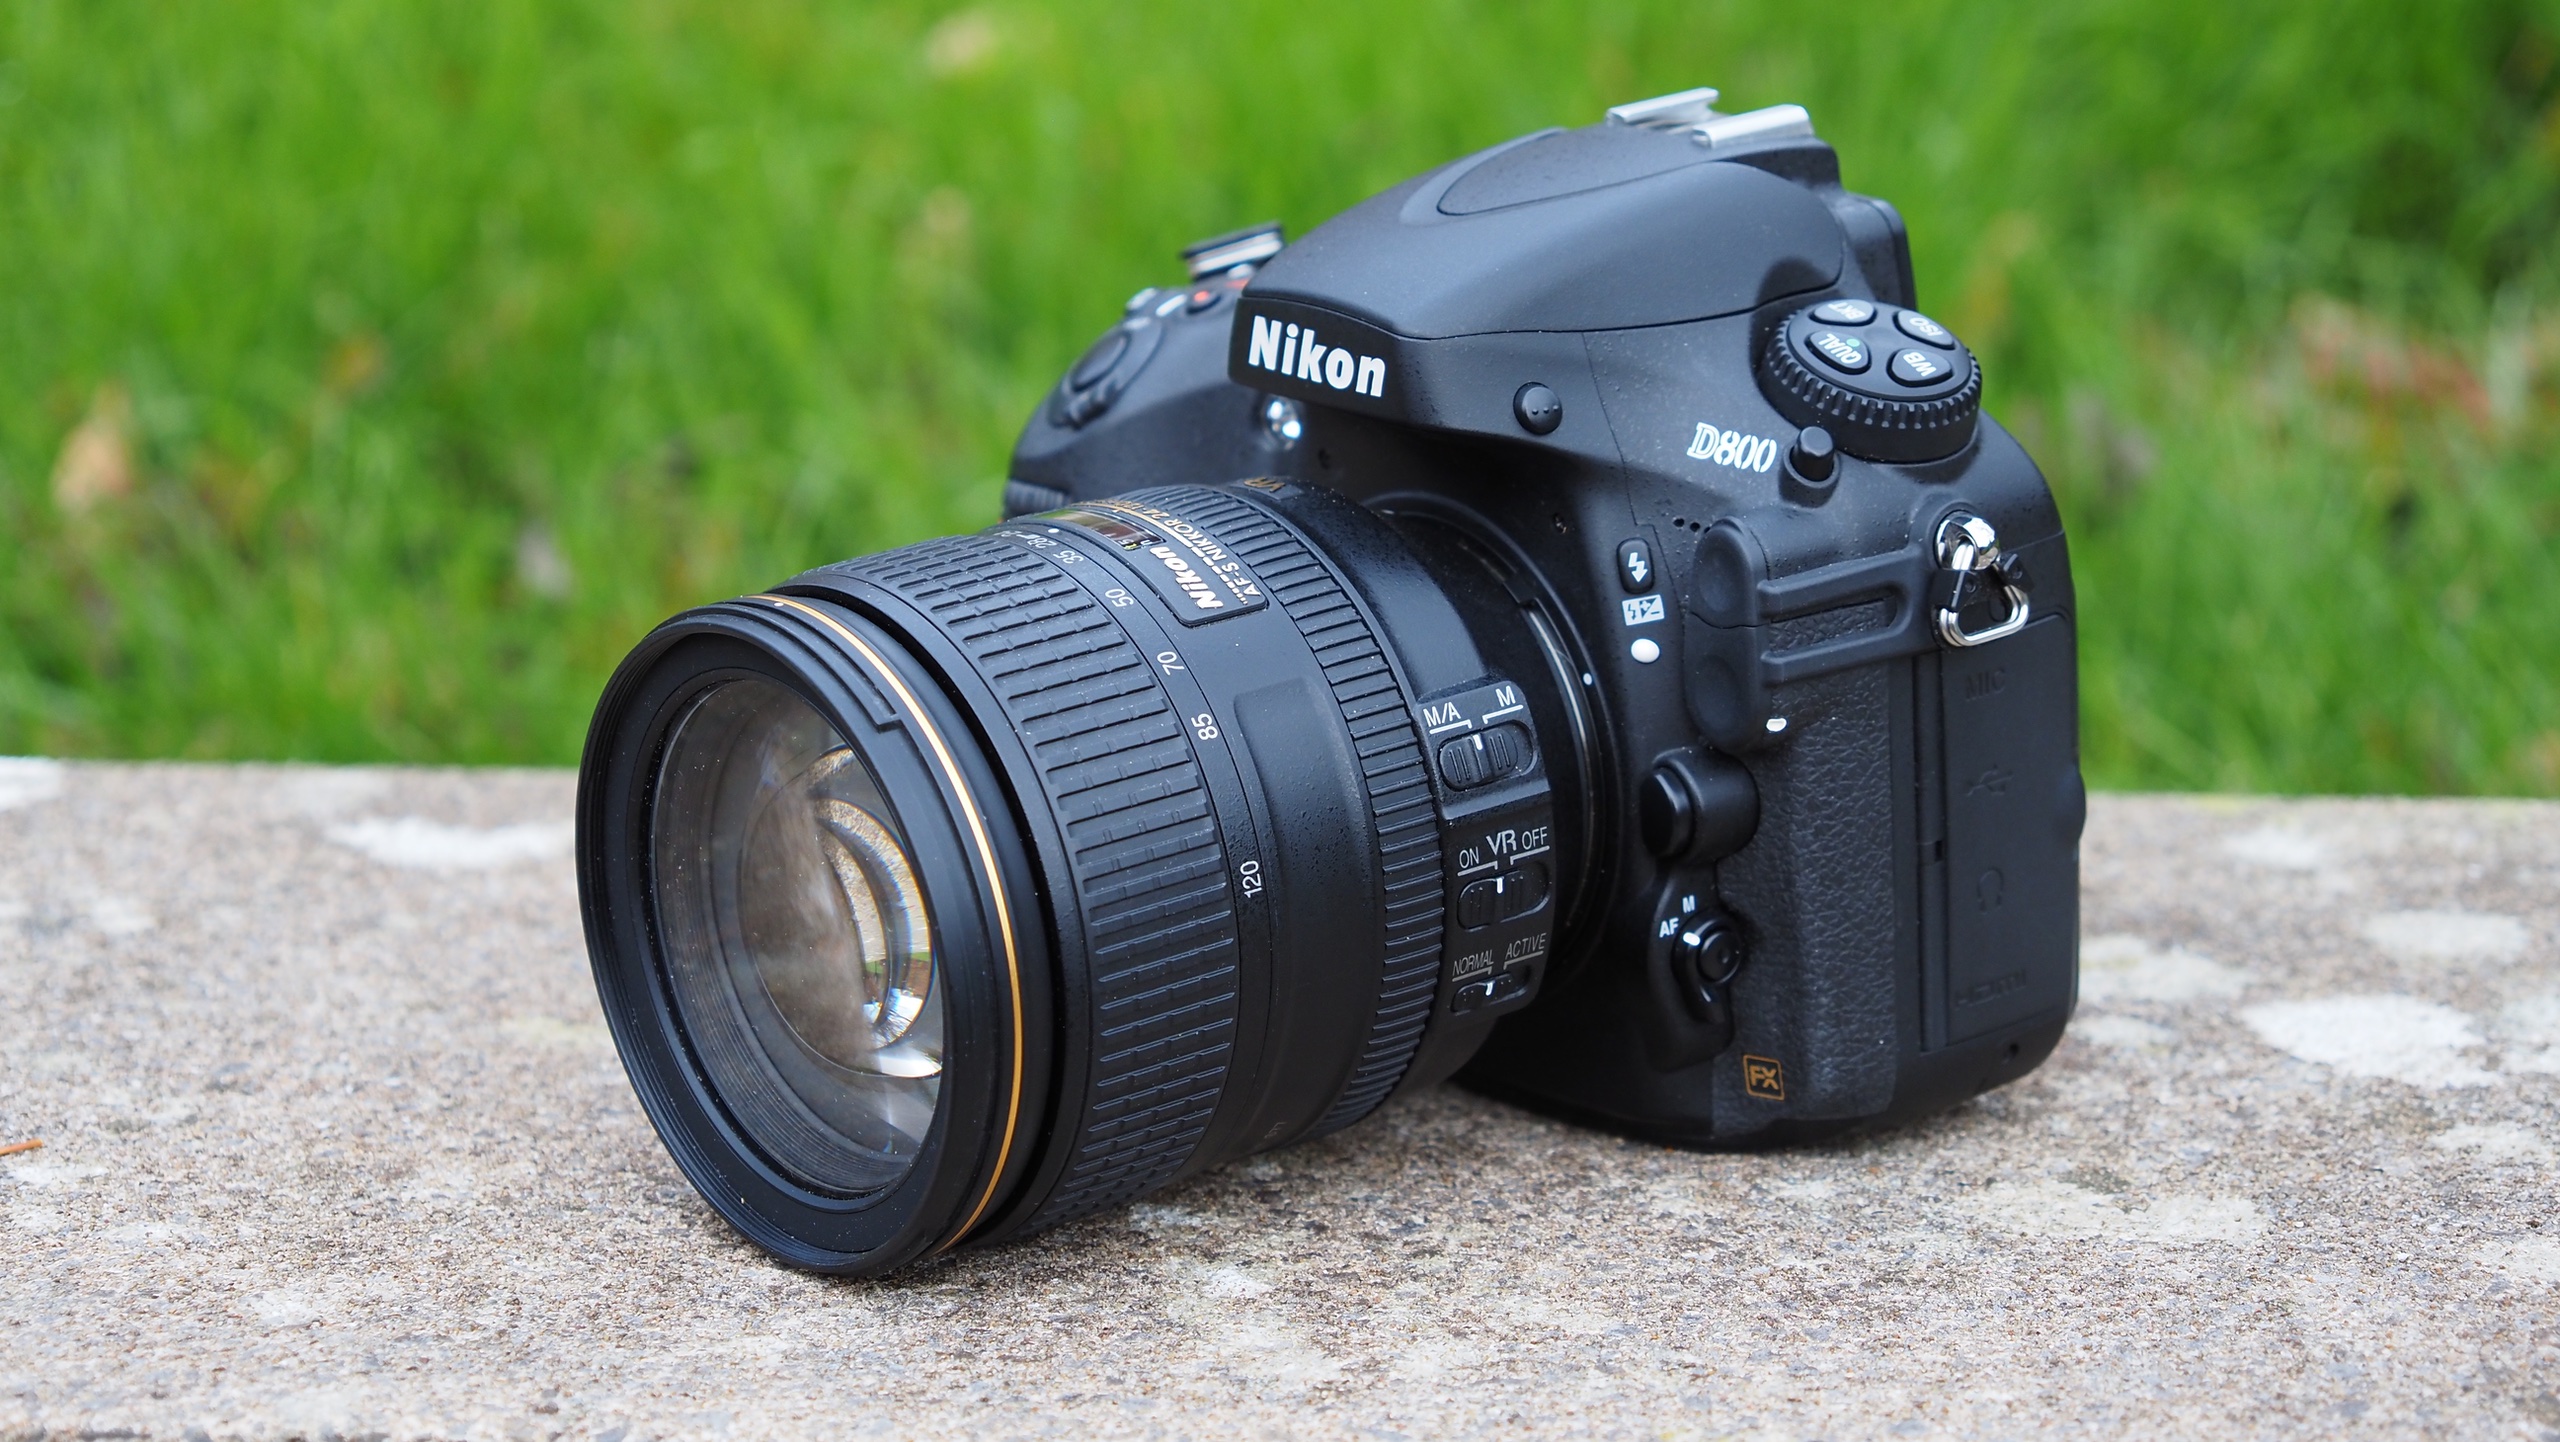 Nikon D800 review in 2023 - fotovolo